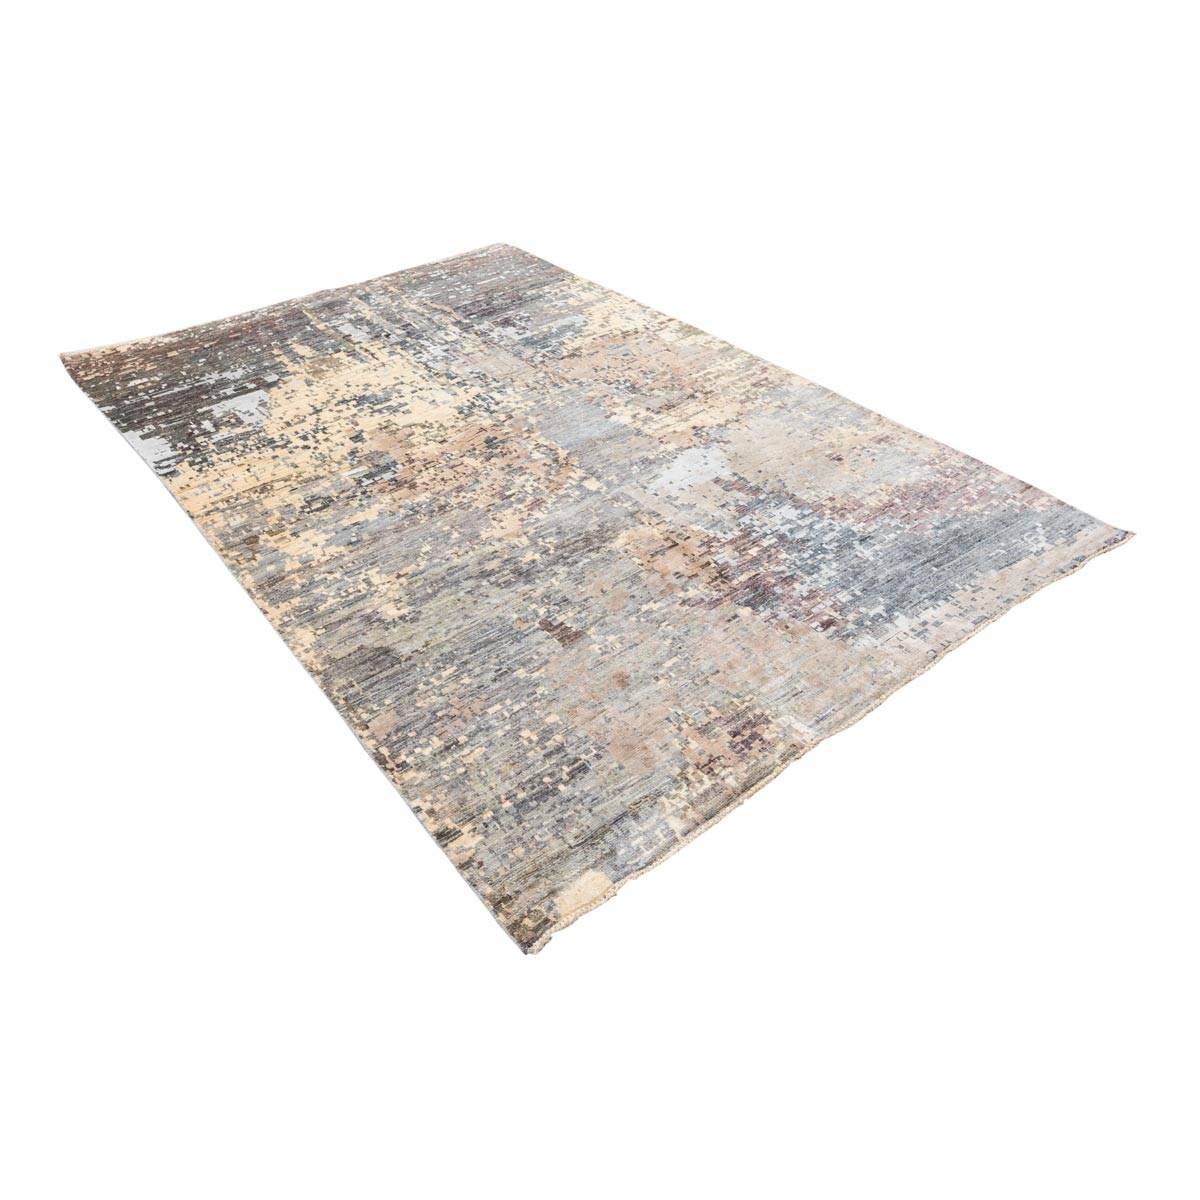 Pakistani Handmade Contemporary Rug in Silk and Wool Earth Shades